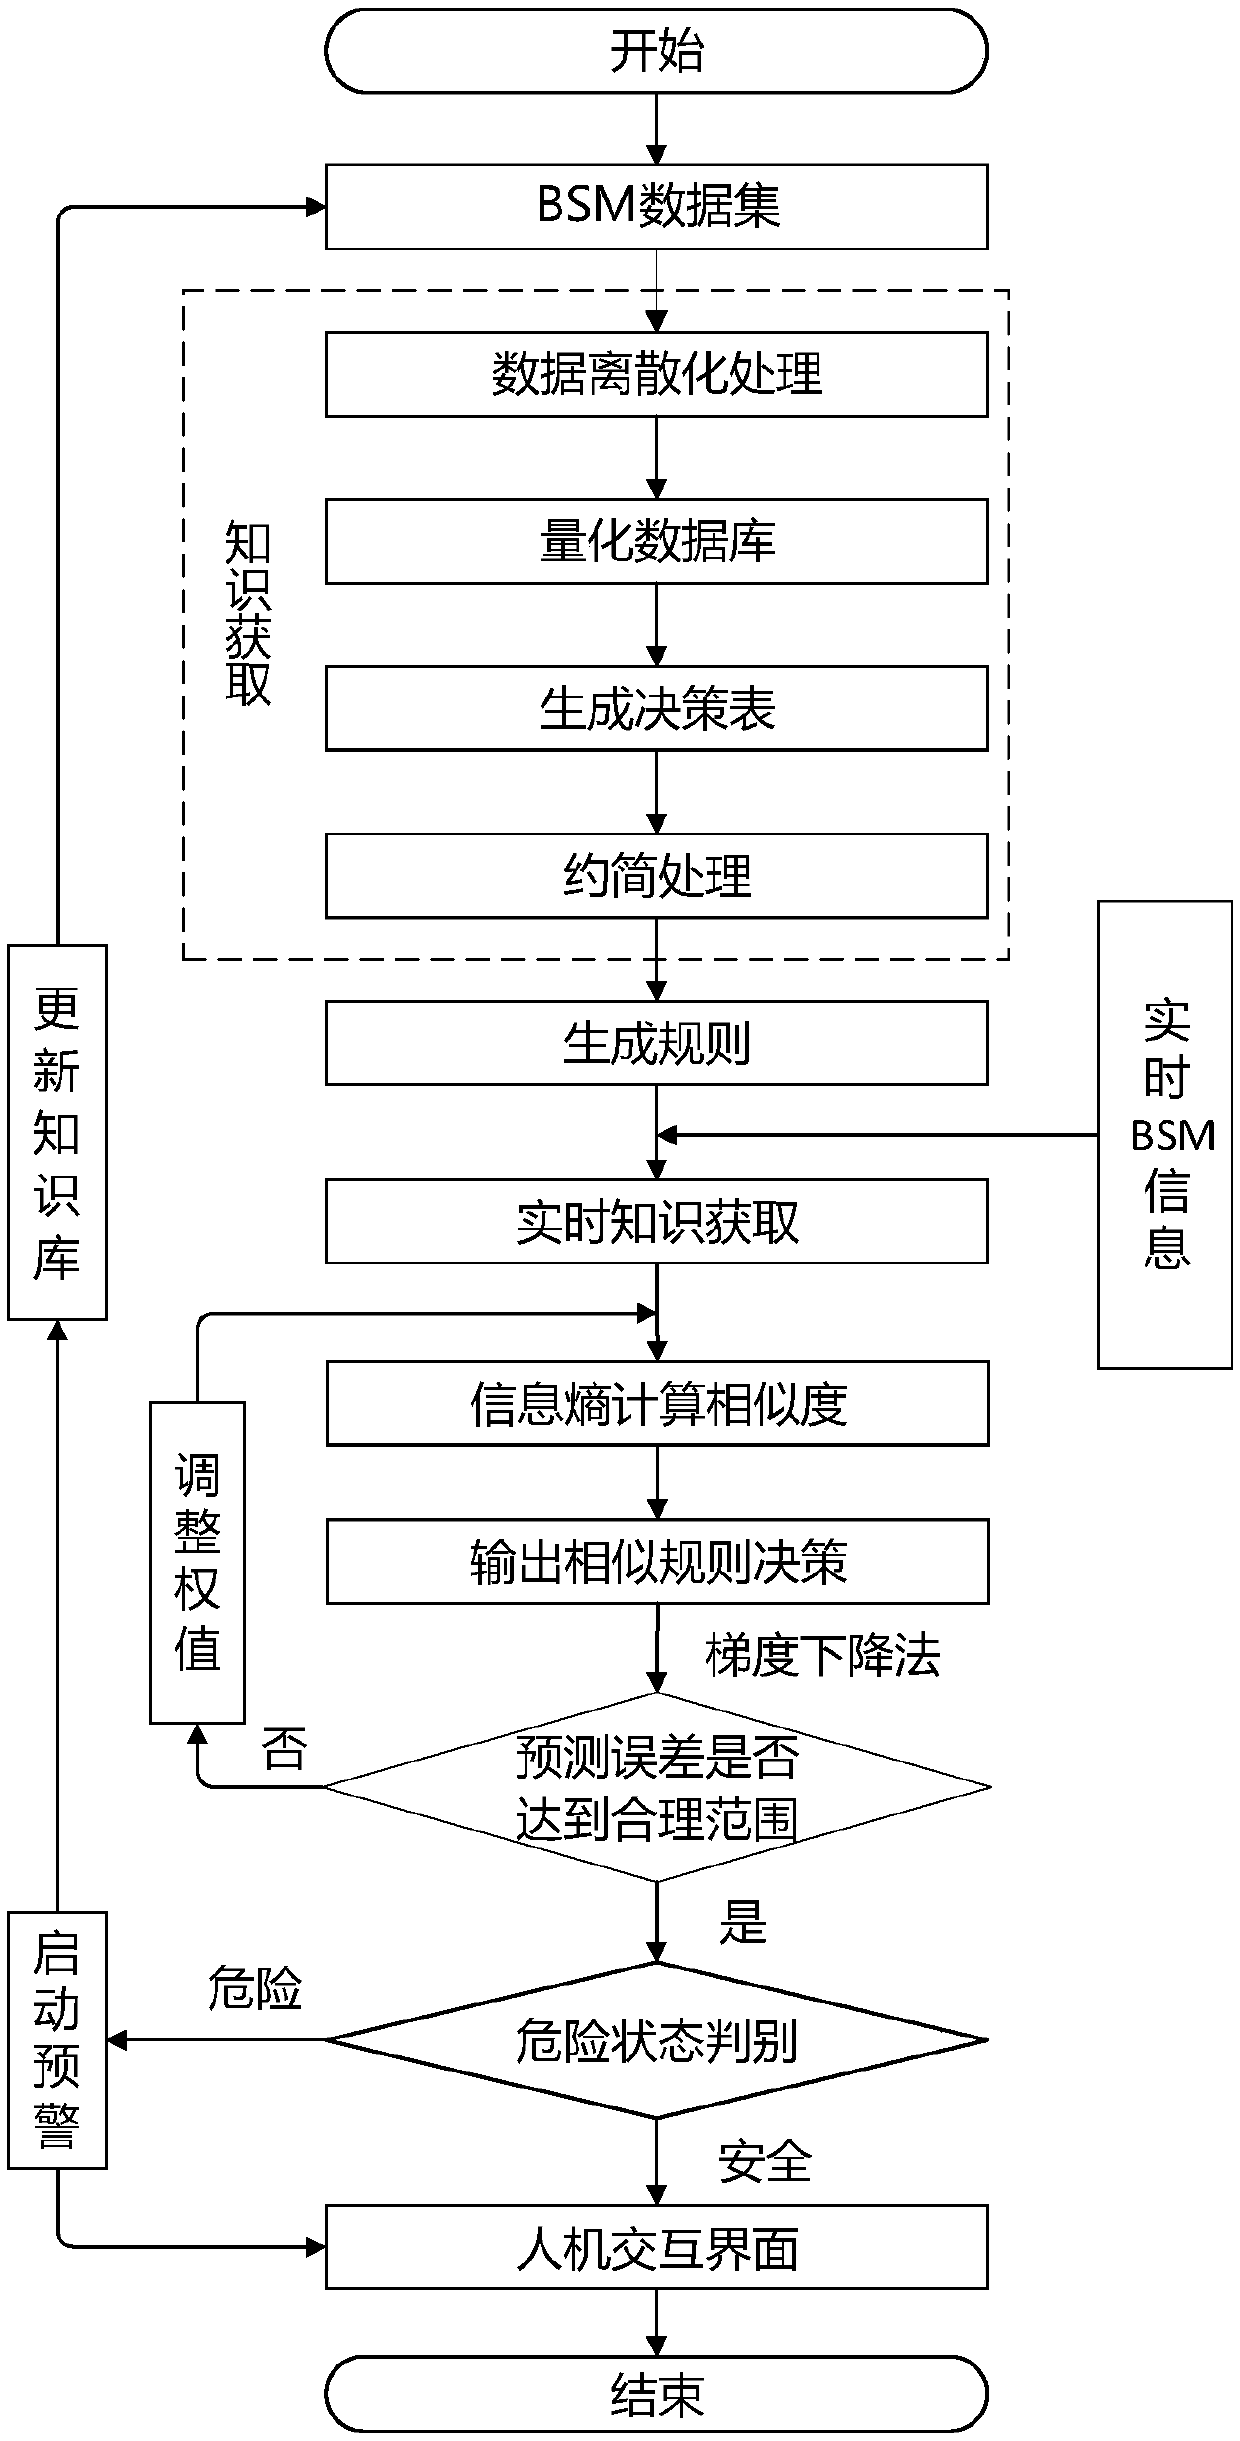 Driving safety monitoring device and method based on car networking BSM (Basic Safety Message) information fusion